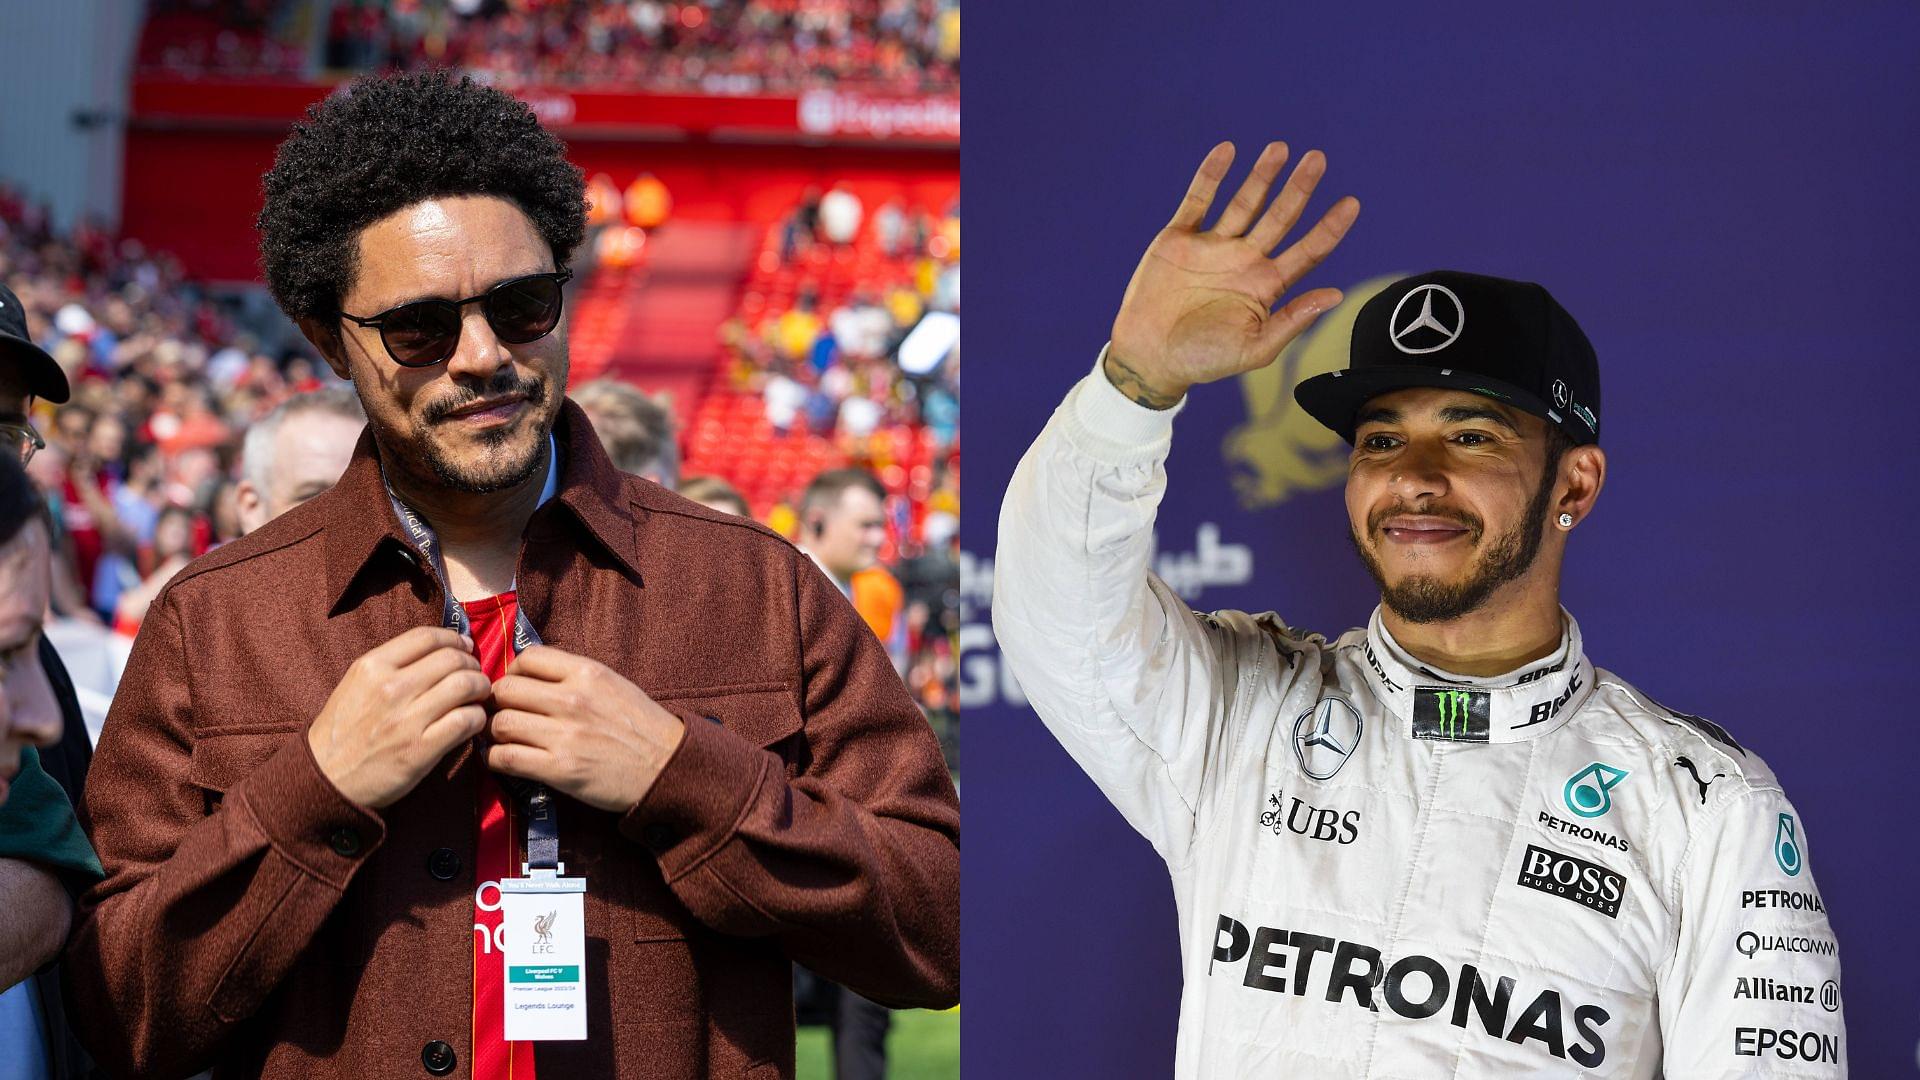 Stand-Up Star Trevor Noah Joked About Mercedes Robbery During Visit with Lewis Hamilton: "And Now They Can't Find the Trophy"